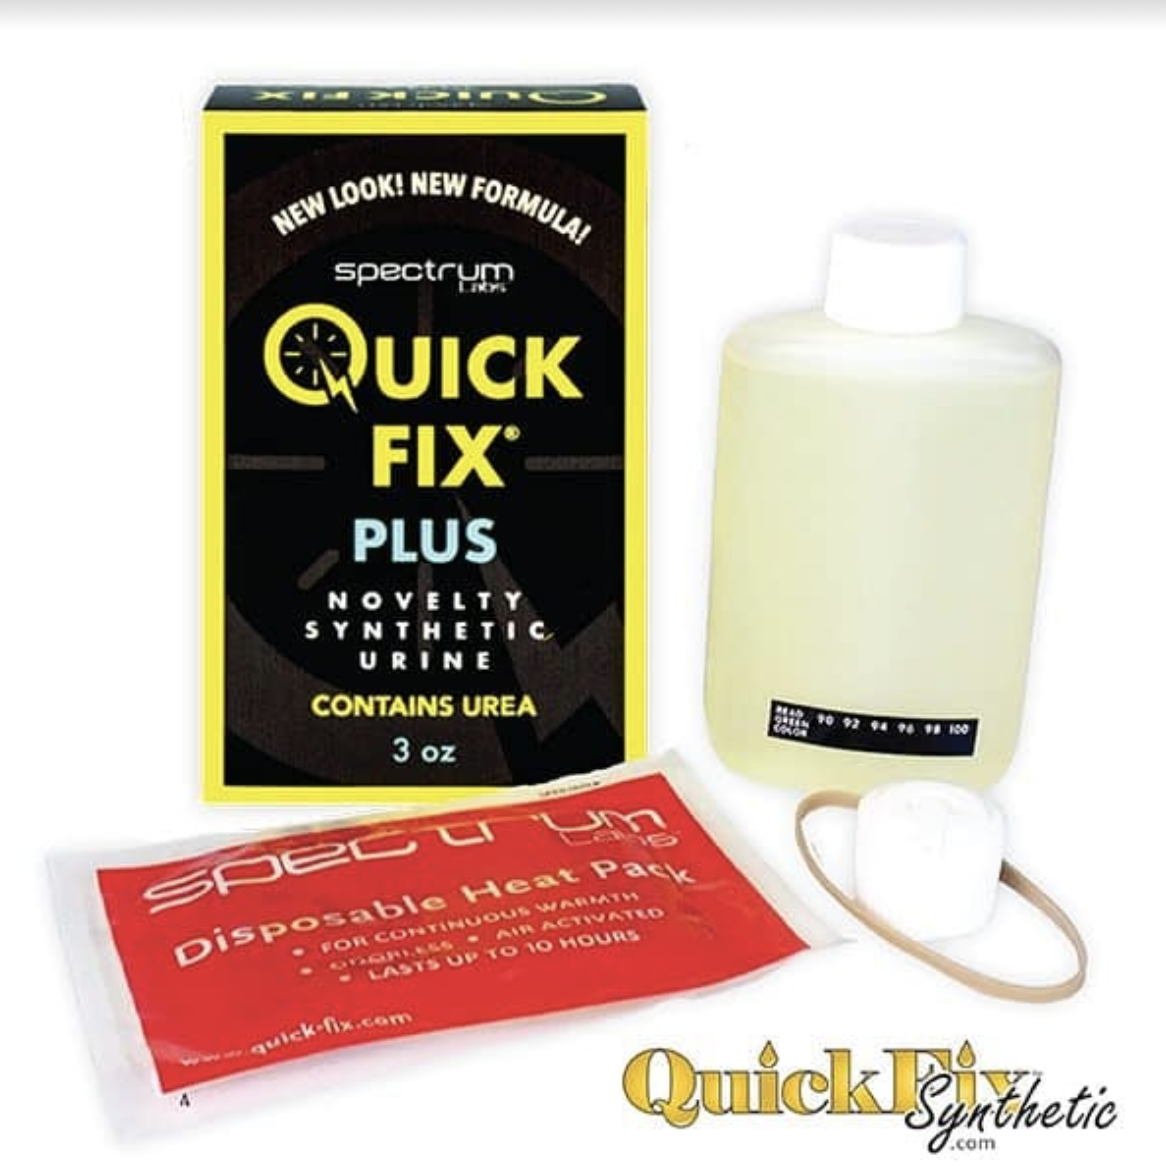 Quick Fix Synthetic Urine Reviews Does This Fake Piss Work?